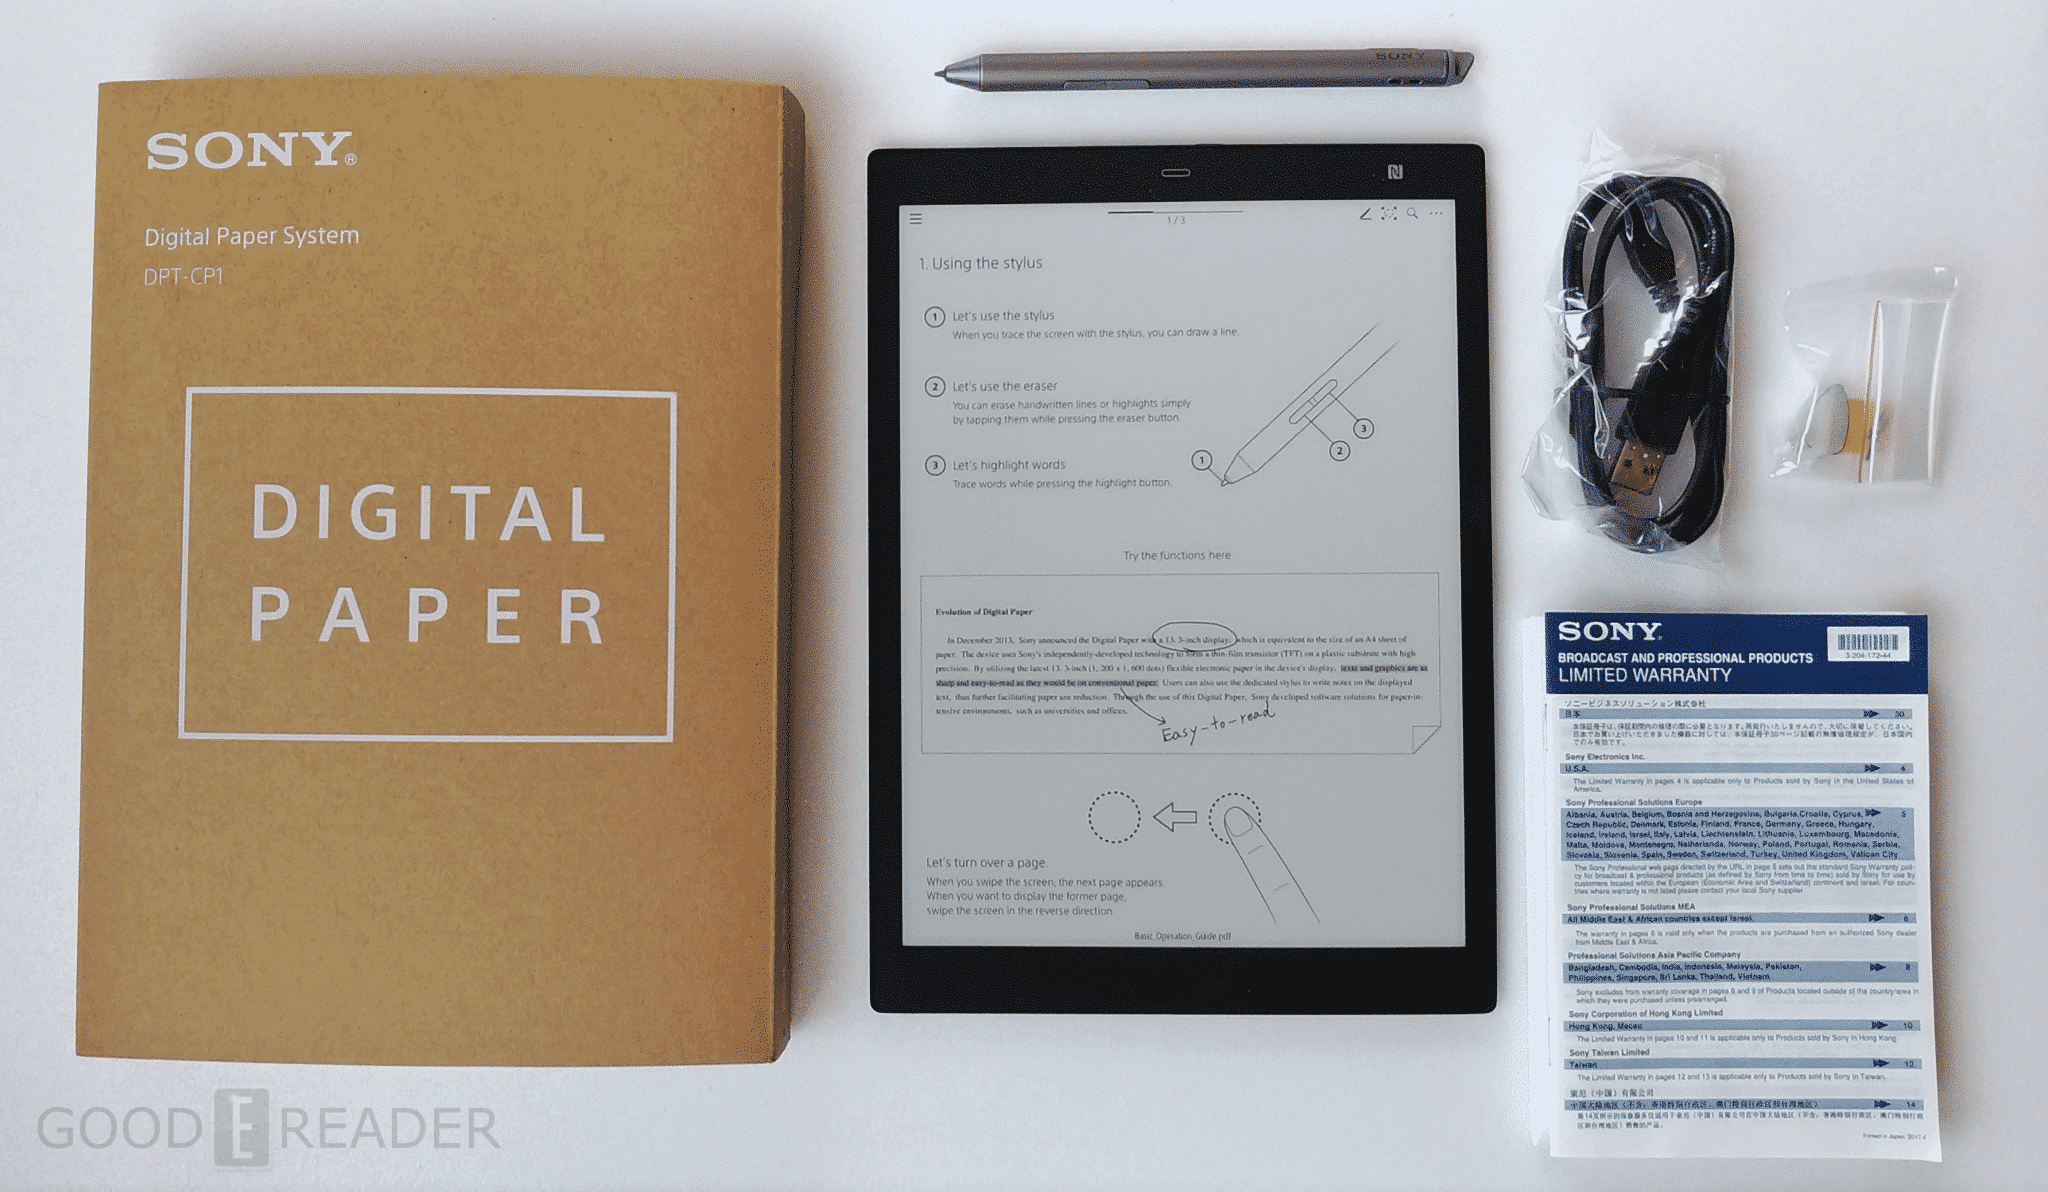 Review of the Sony Digital Paper DPT-CP1 - Good e-Reader